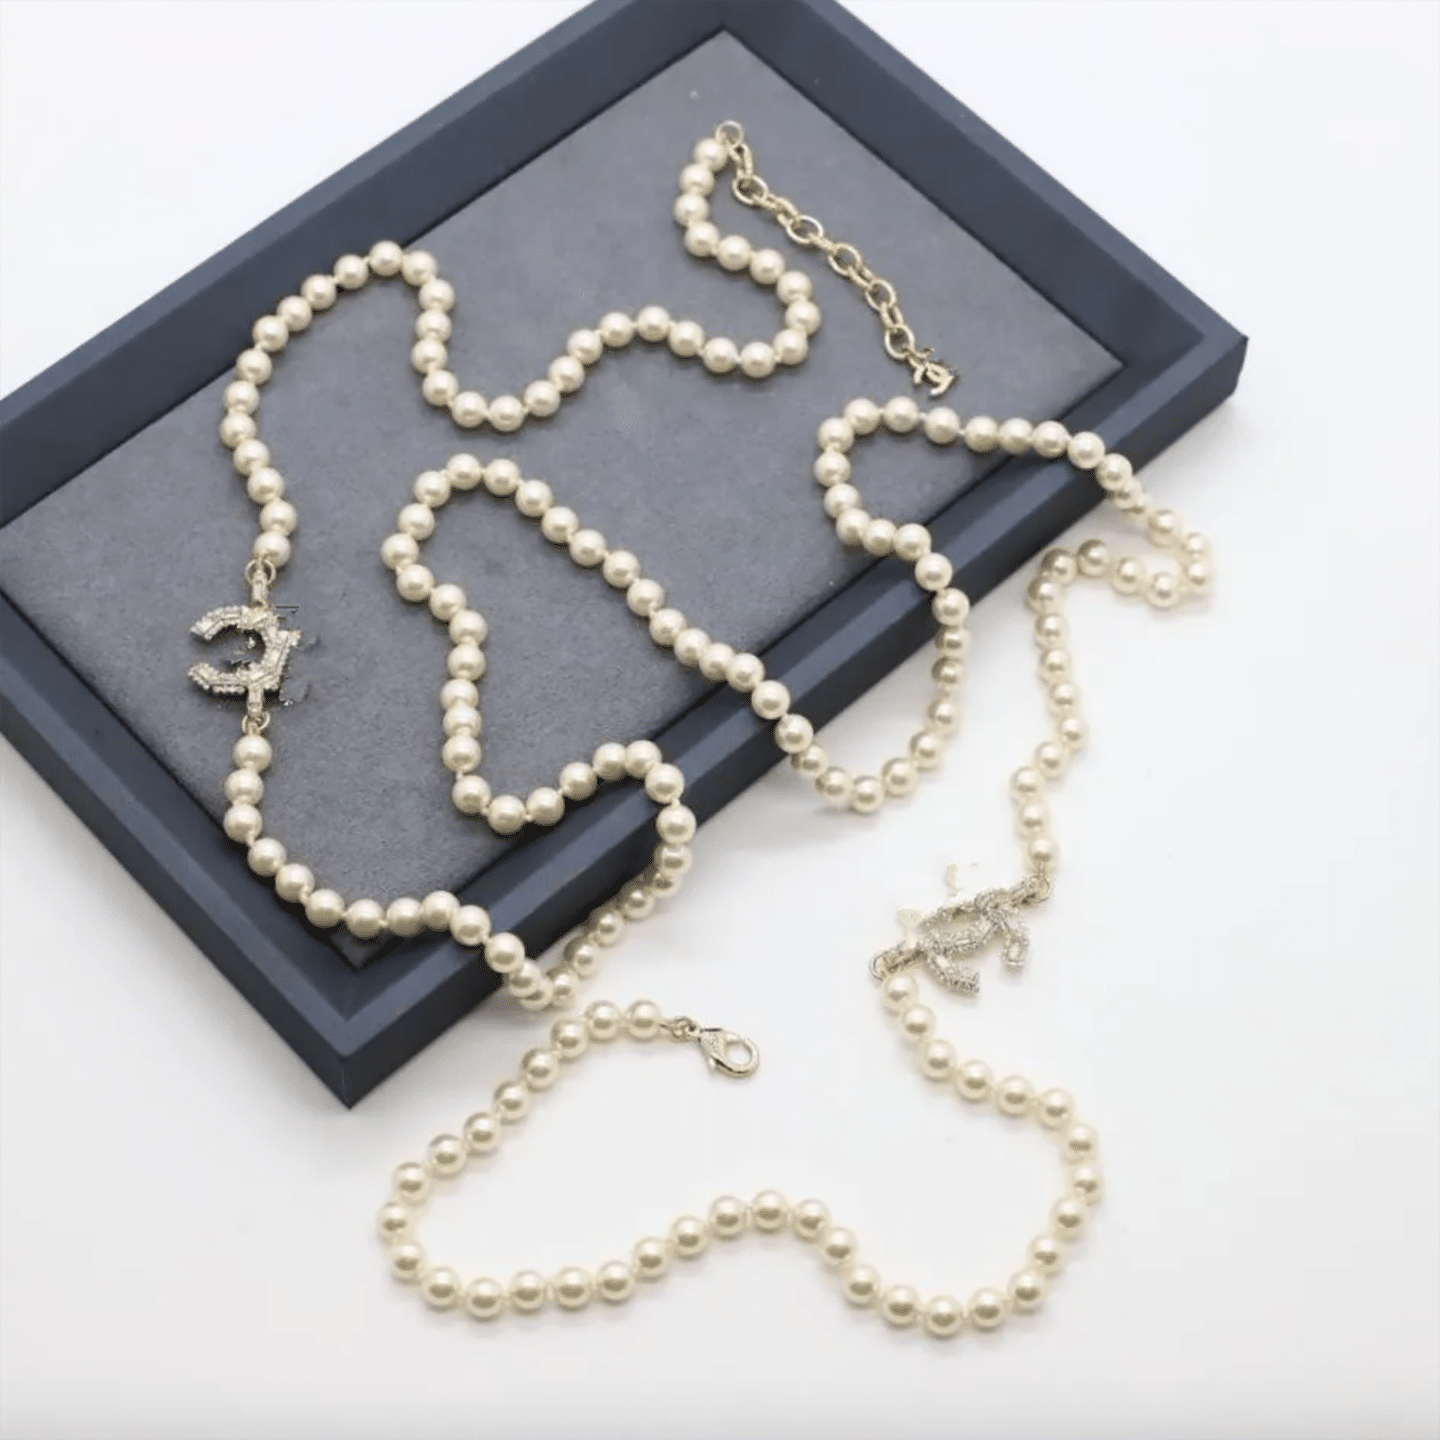 Chic Chanel necklace dupe picks, by fashion blogger What The Fab